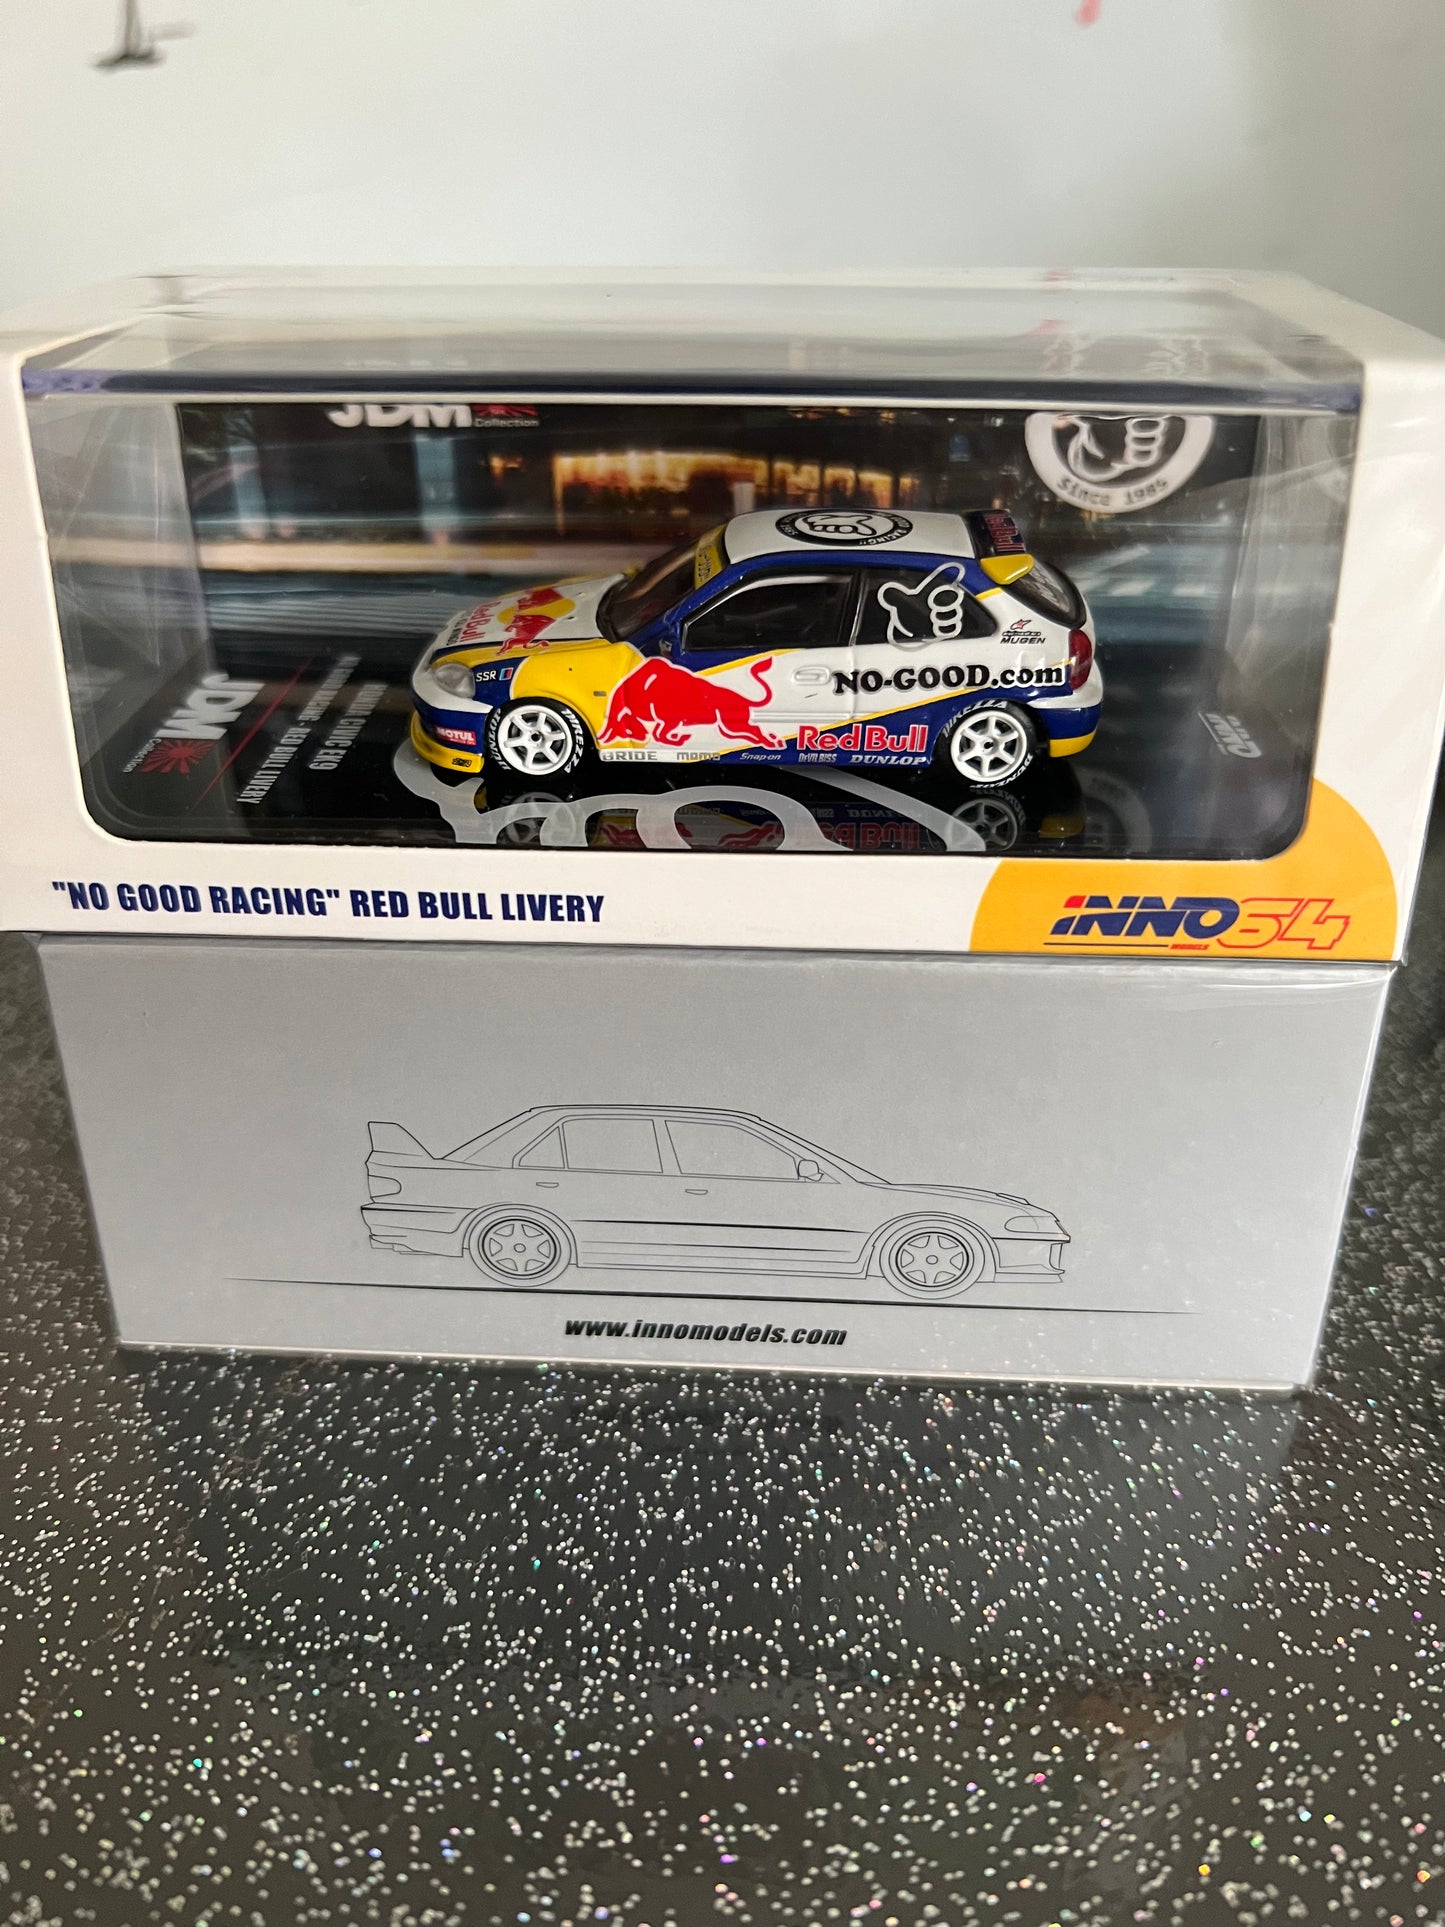 Inno 64 Honda Civic “No good racing “ red bull livery 2023 release